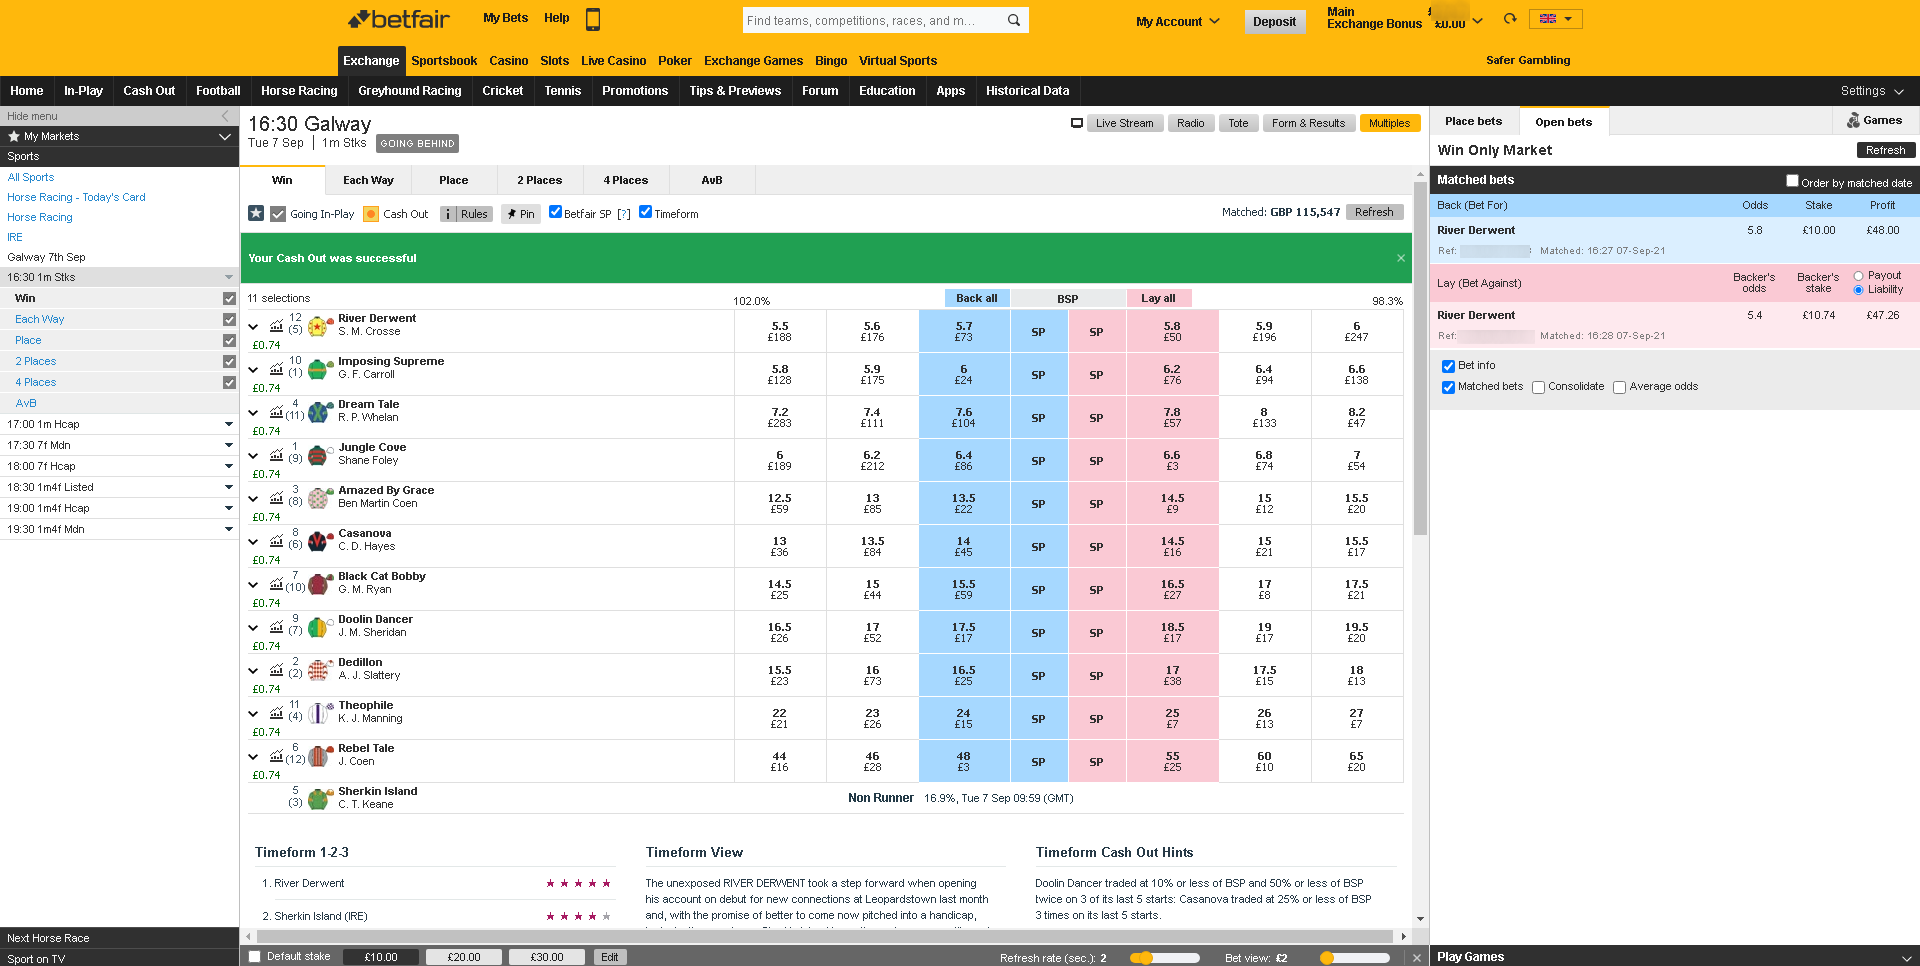 Betfair Exchange - A back bet, with a lay bet - Winning trade.